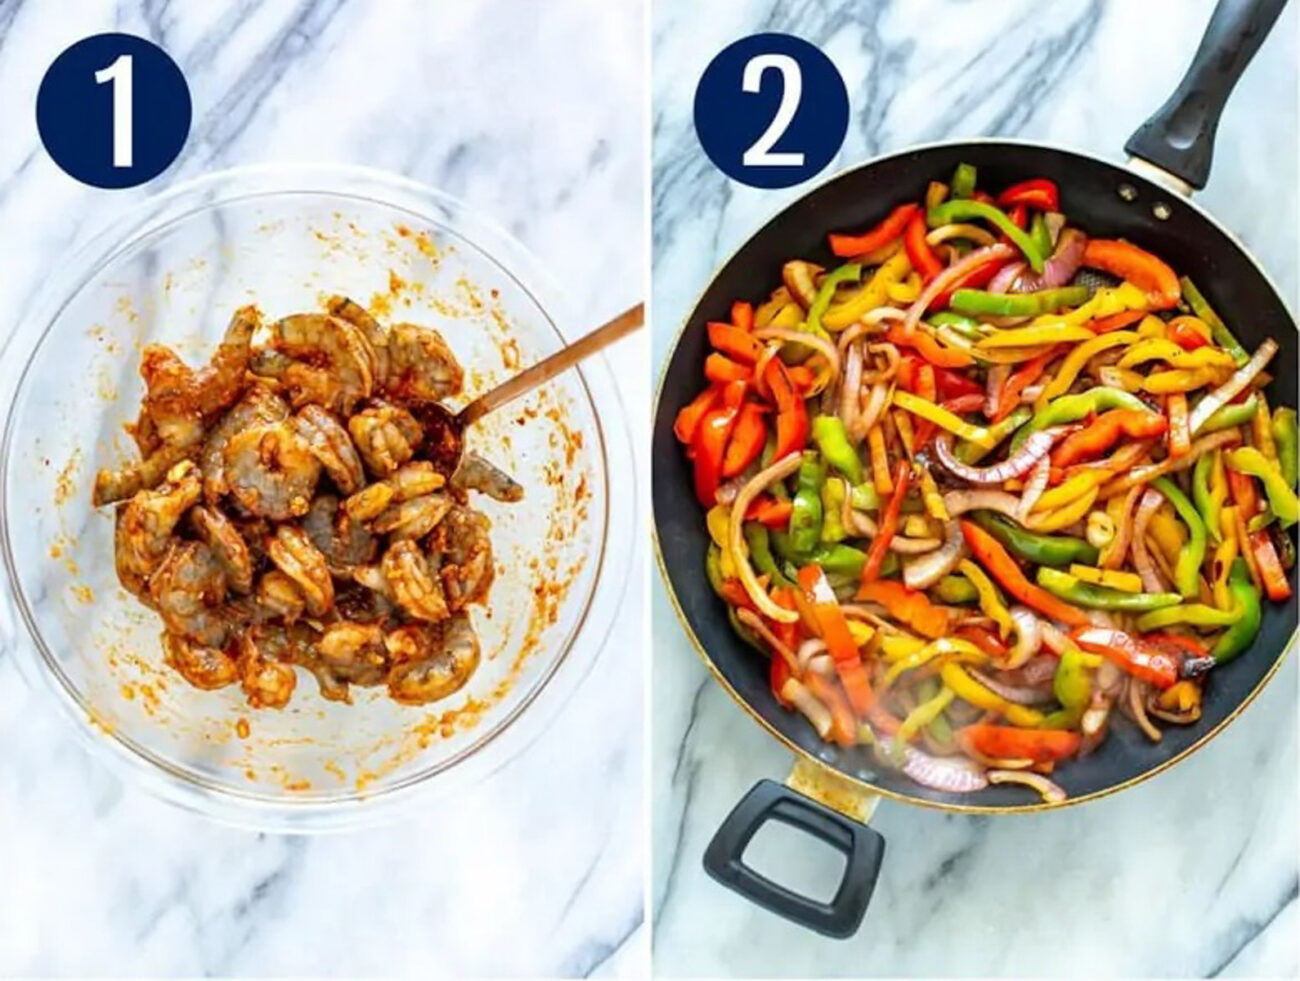 Steps 1 and 2 for making shrimp fajitas: Marinate shrimp and saute peppers and onions.